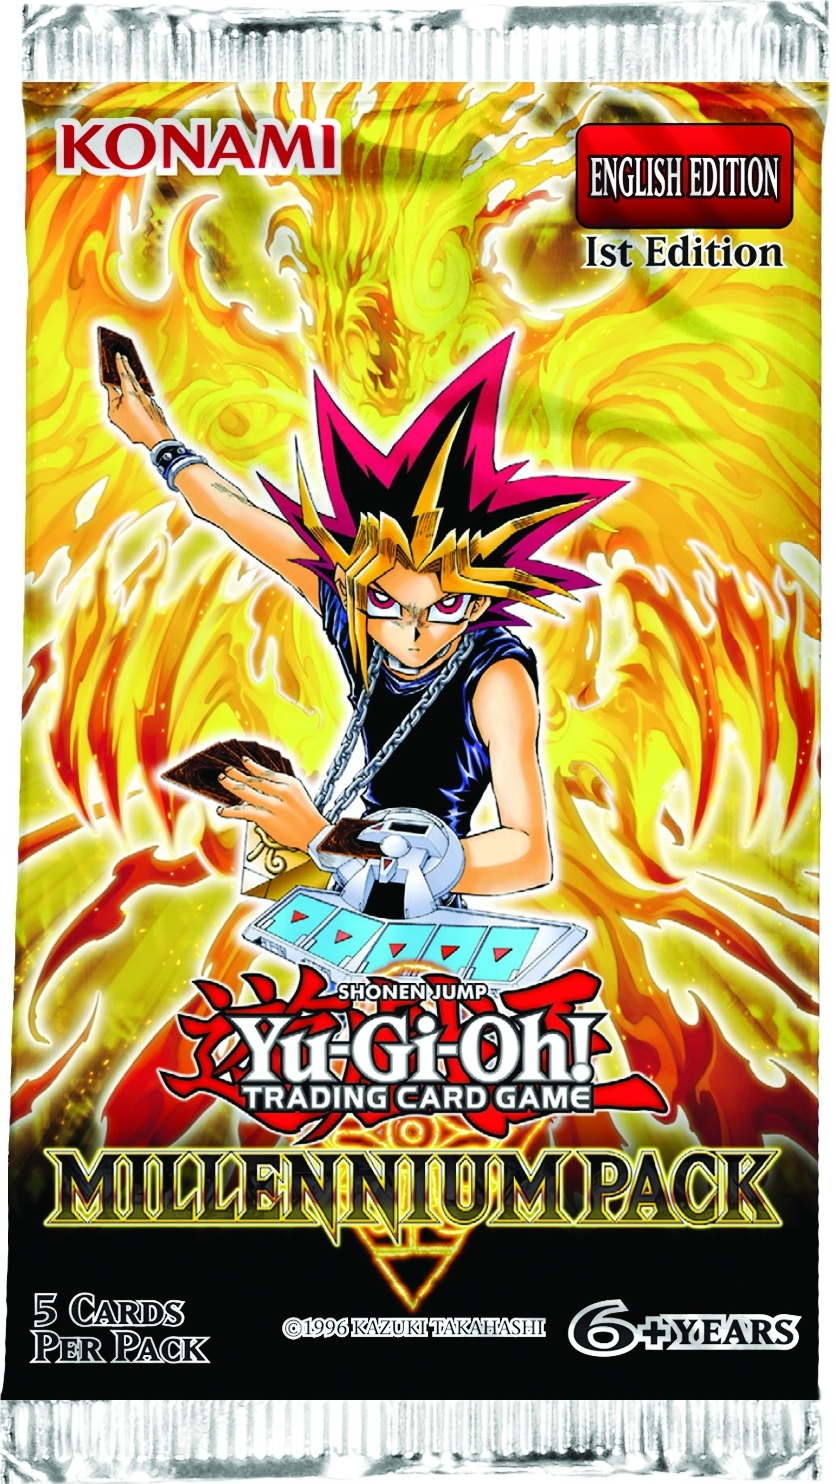 YU-GI-OH! (YGO): millenium pack booster pack